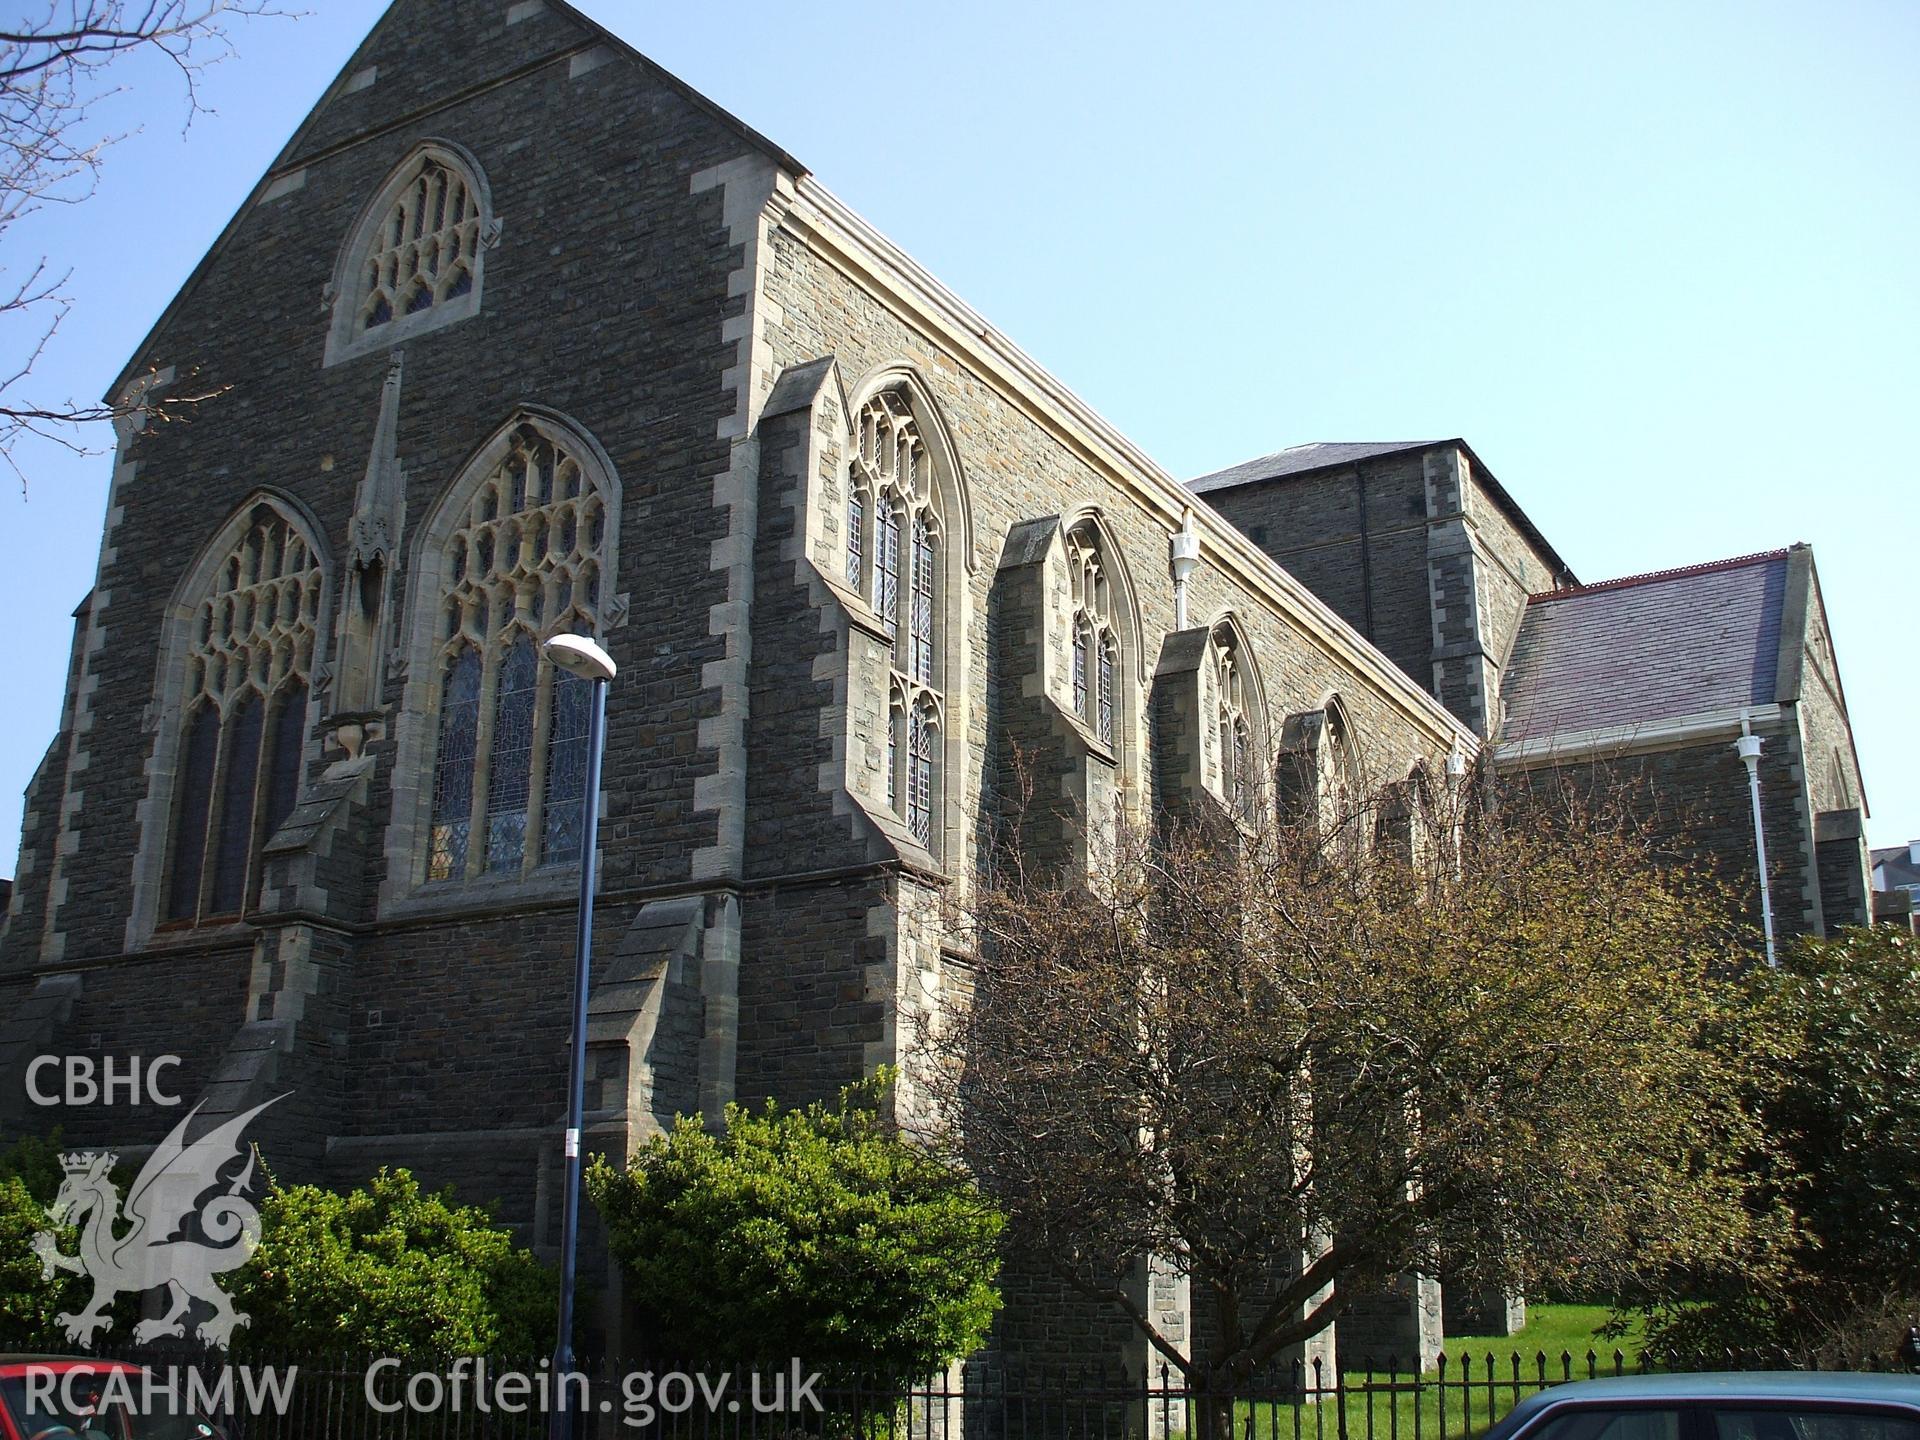 Colour digital photograph showing the exterior of Holy Trinity Church, Aberystwyth.